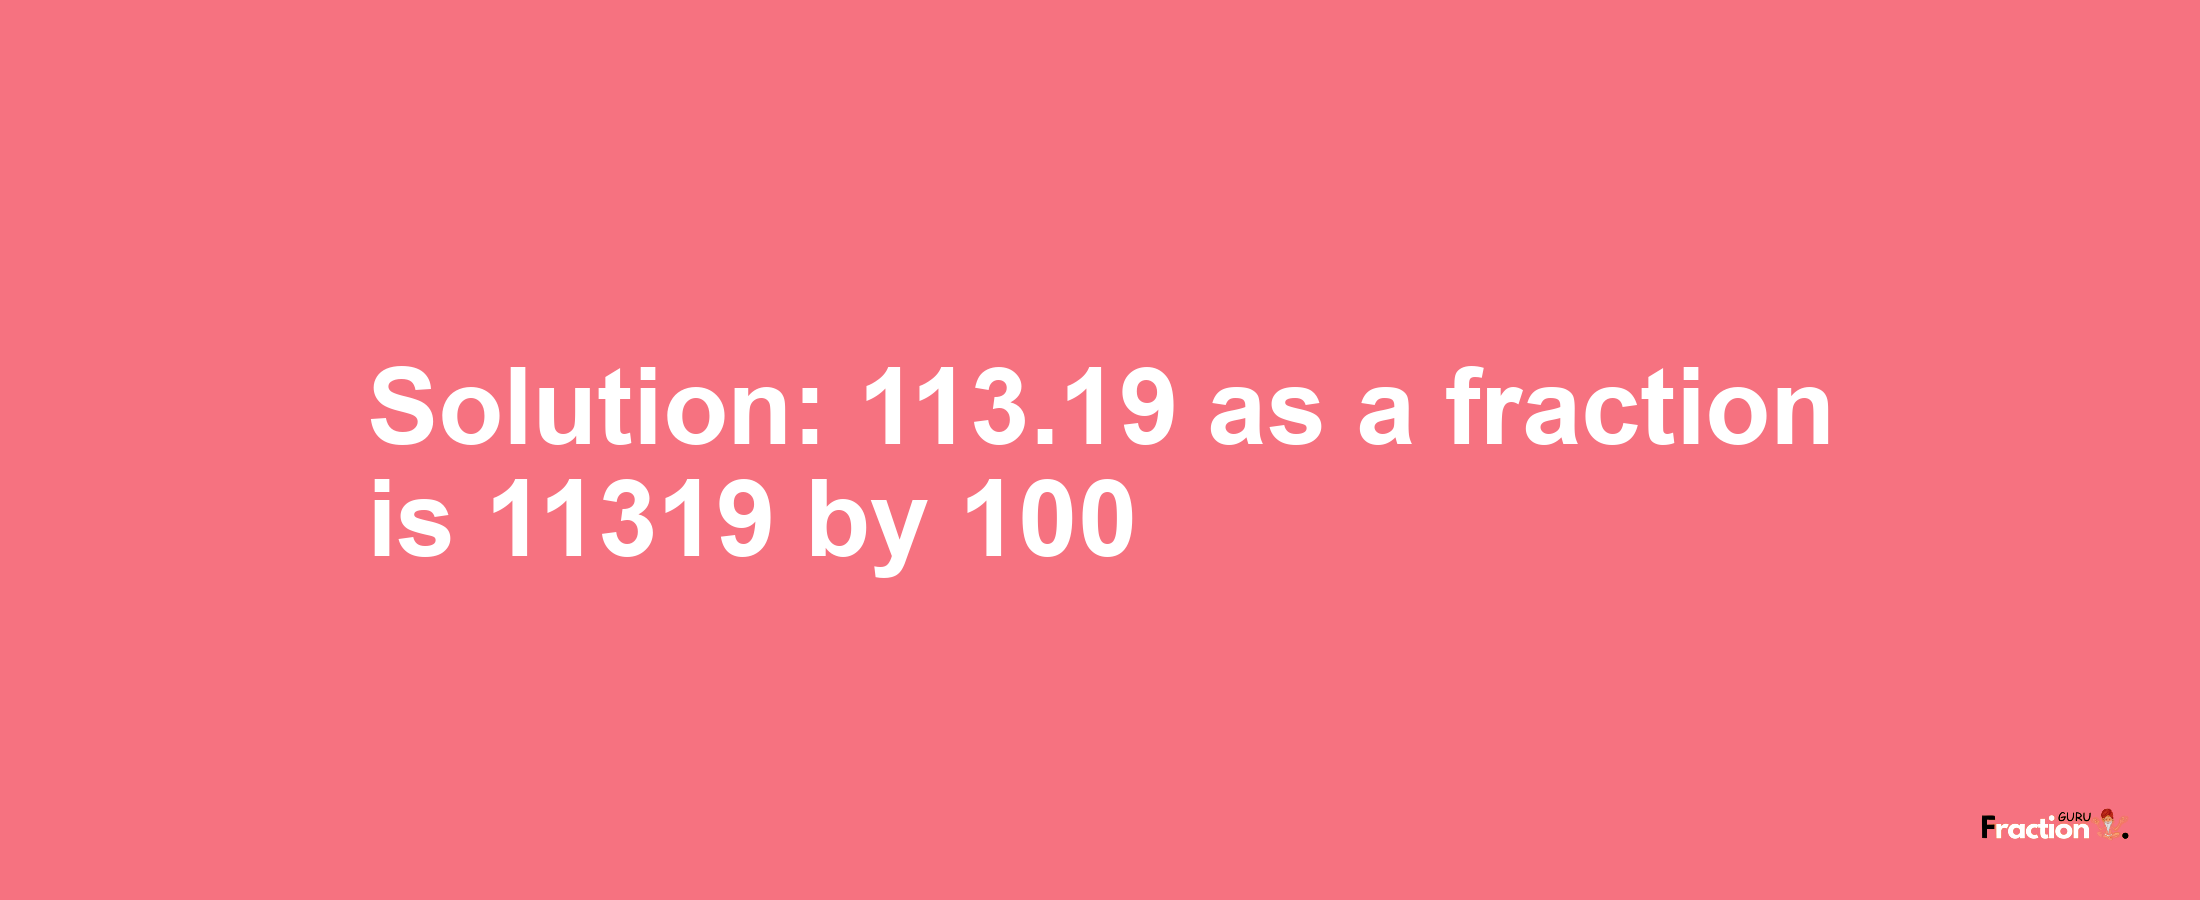 Solution:113.19 as a fraction is 11319/100